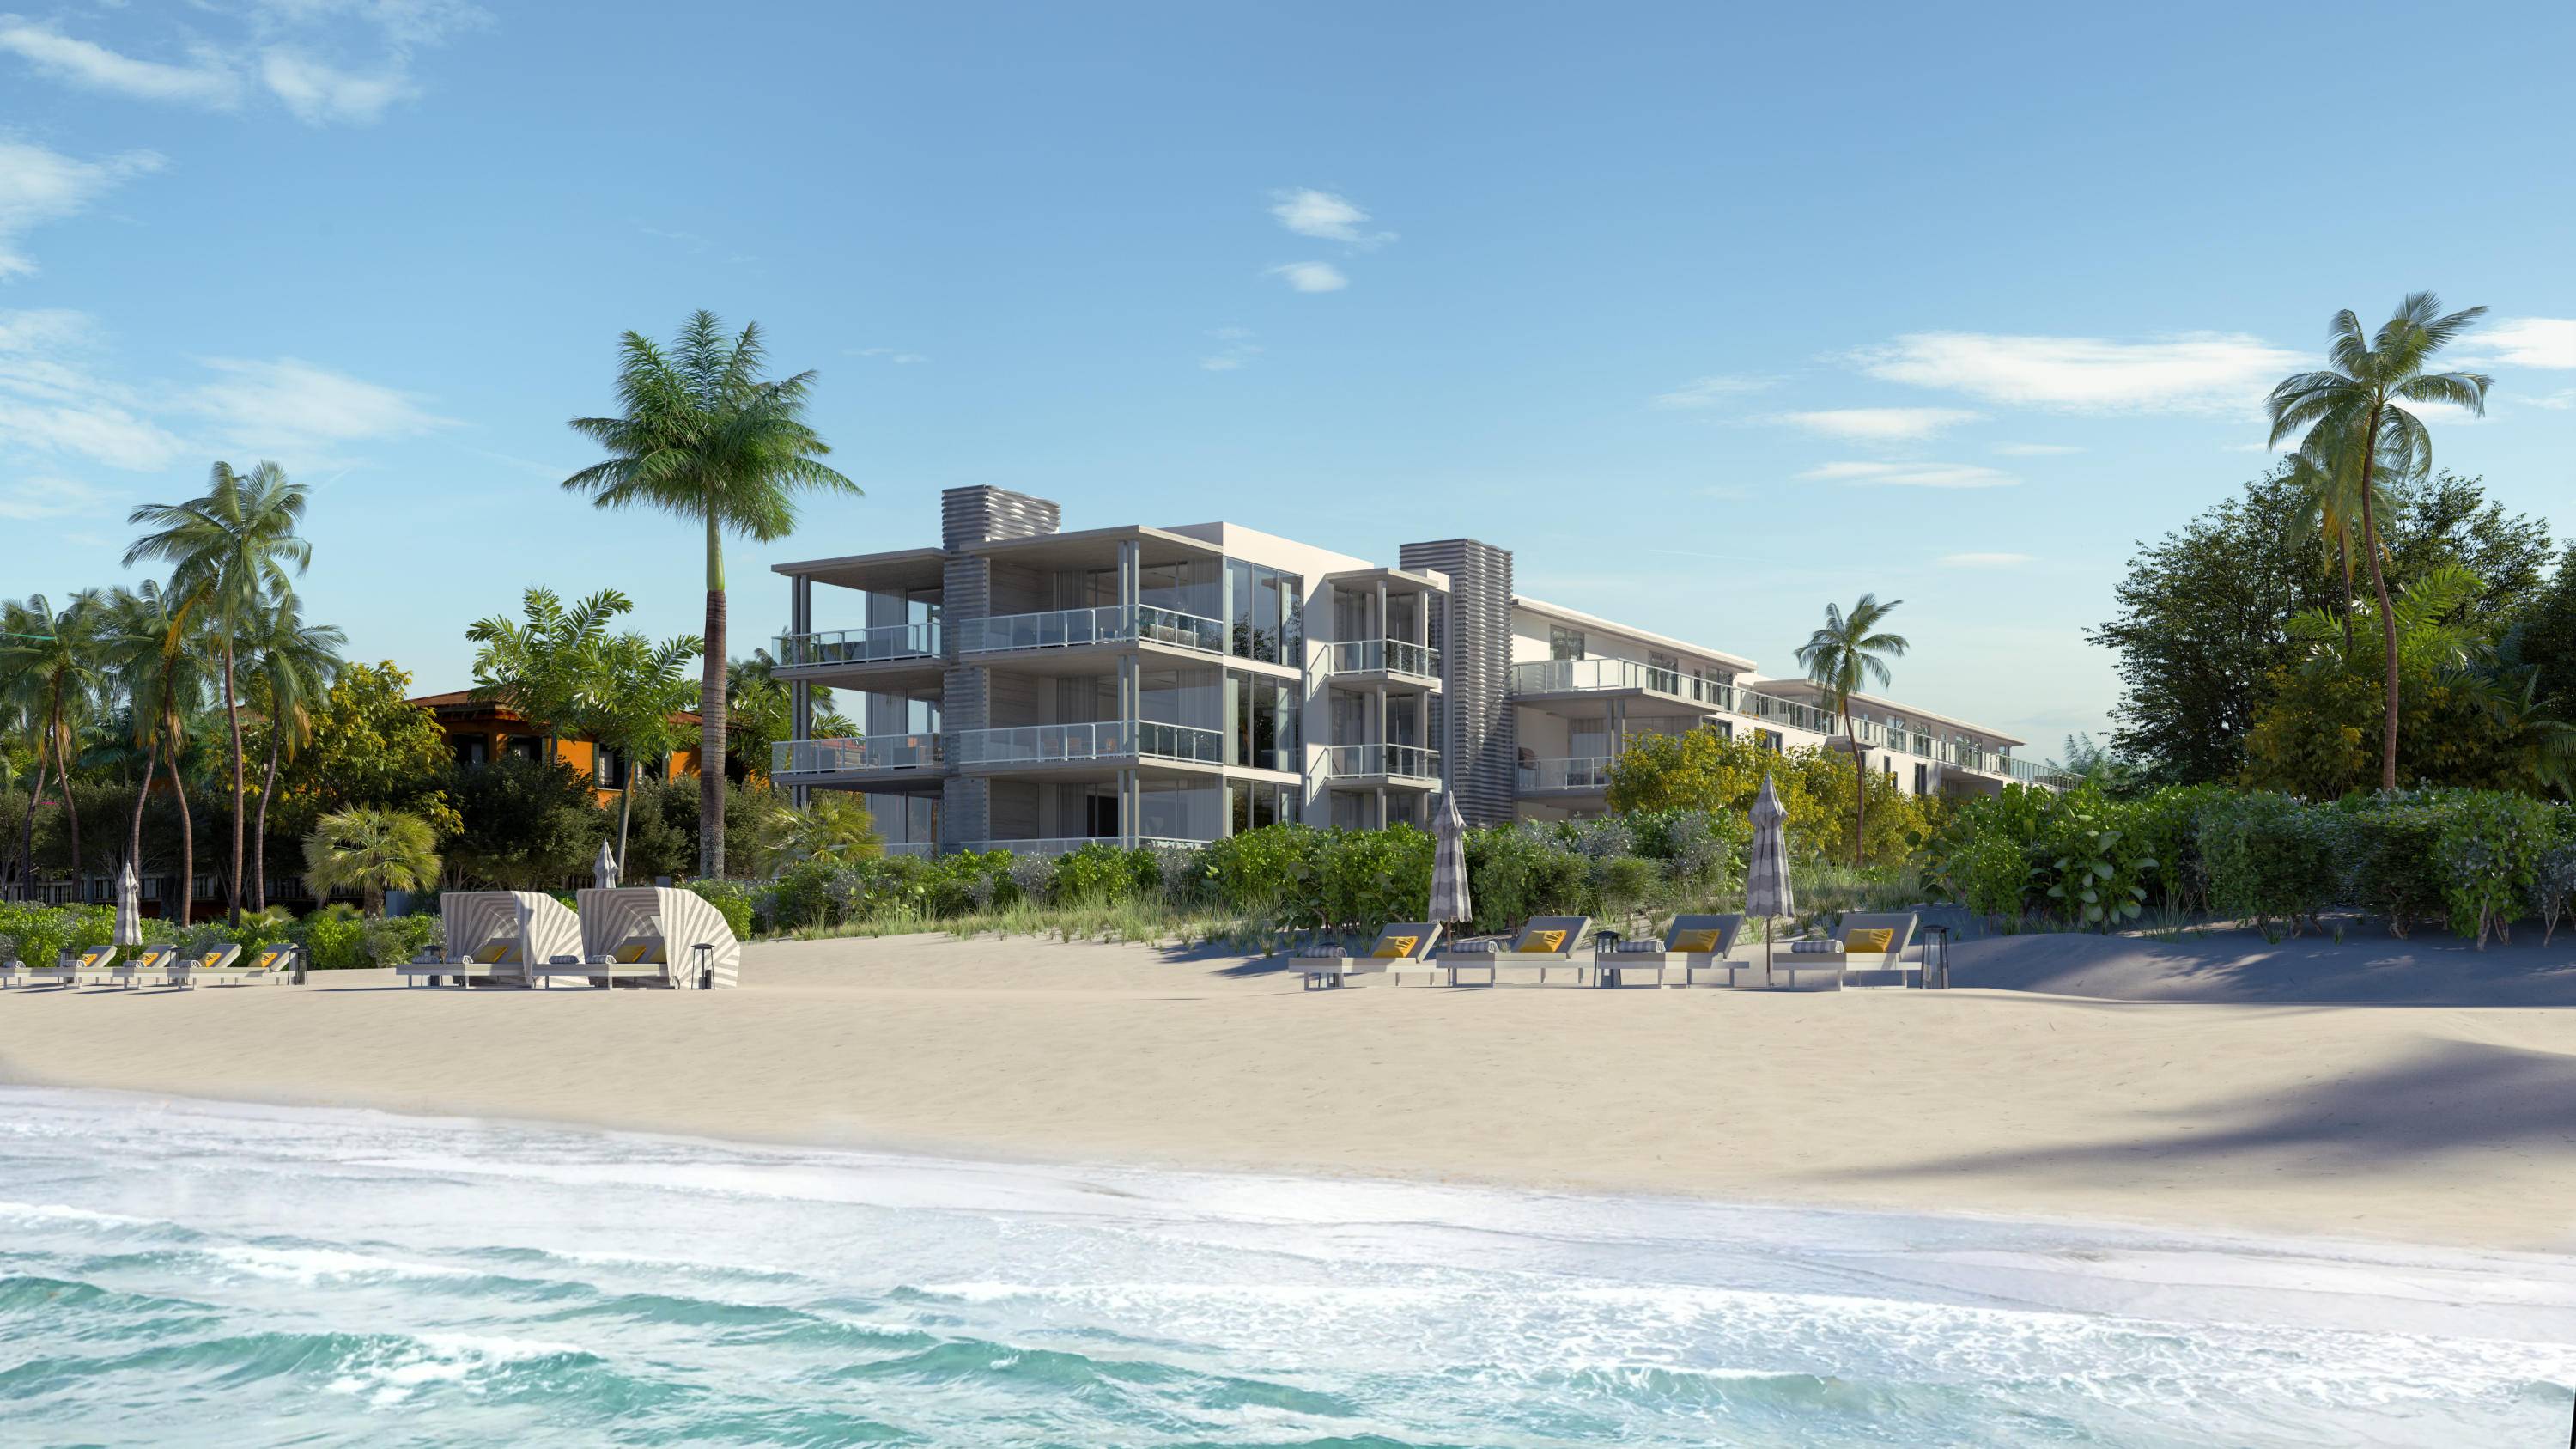 COMPLETION Q1 2023 LAST REMAINING PENTHOUSE RESIDENCE Situated on 120' of pristine oceanfront, 1625 Ocean, Delray Beach's newest boutique building, offers 14 fortunate homeowners a lifestyle of sun, sand and ...